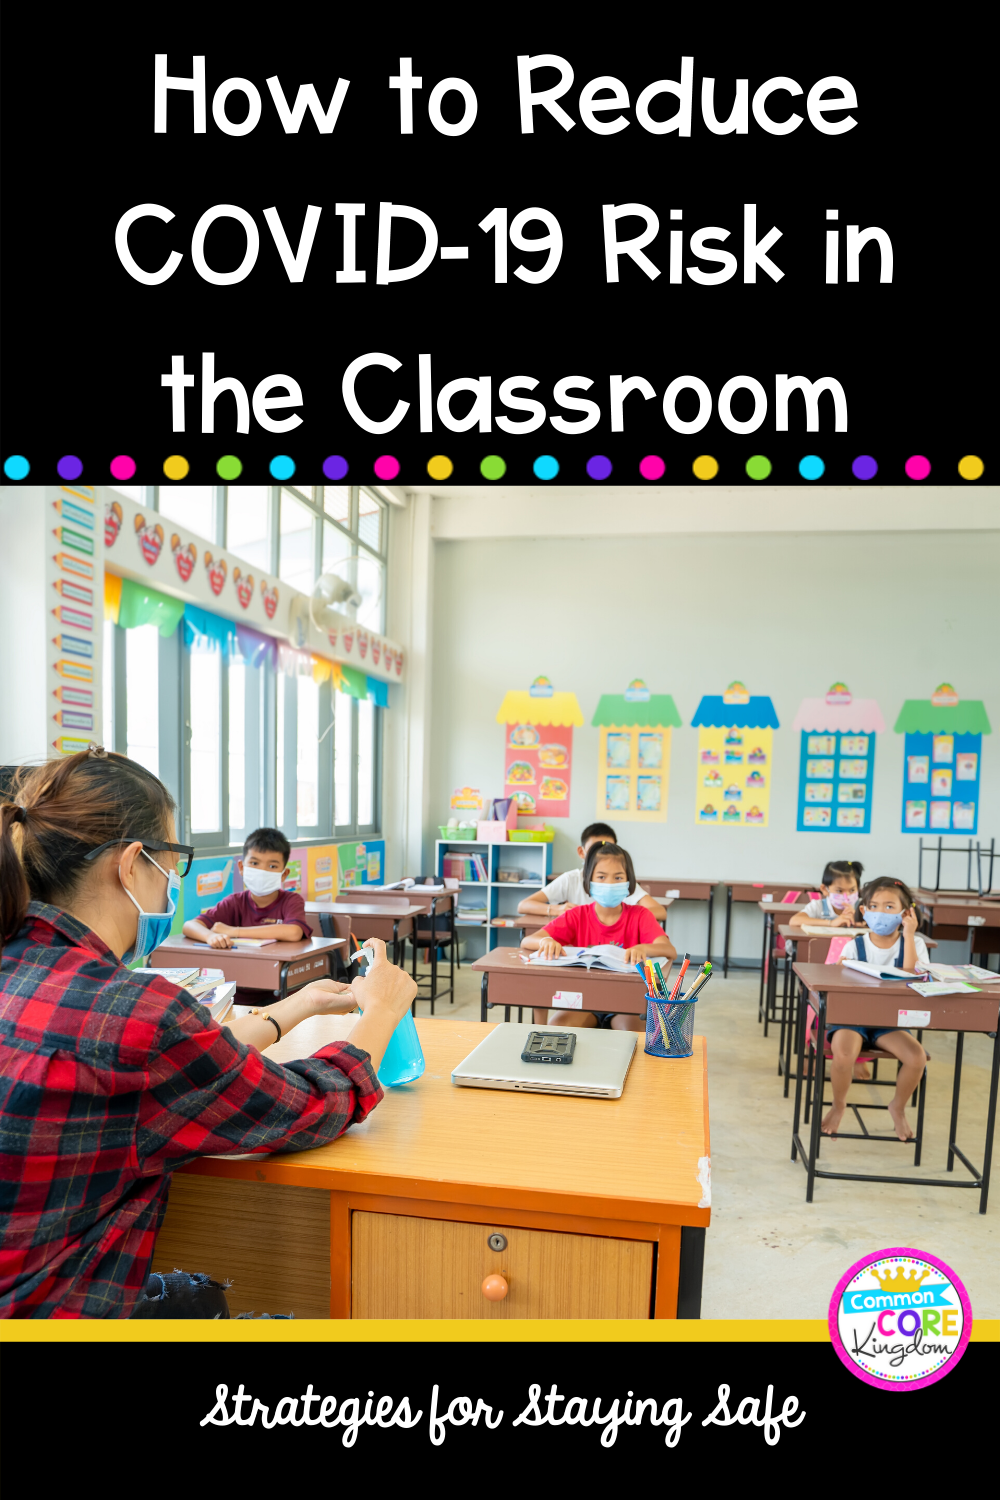 How teachers can reduce the risk of COVID-19 in the classroom